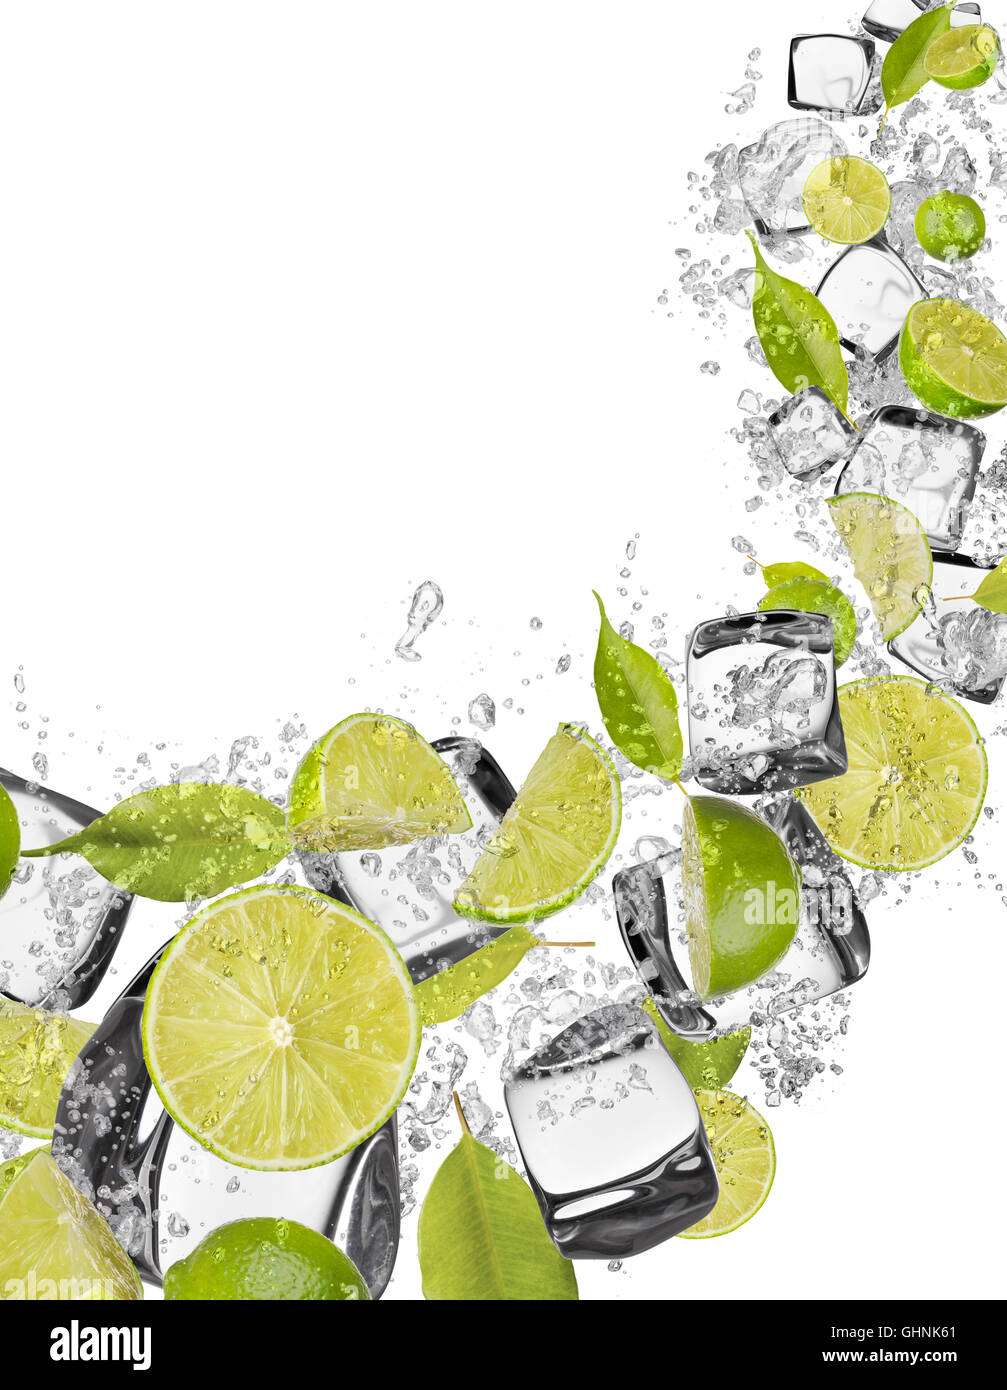 Pieces of limes in water splash and ice cubes, isolated on white background Stock Photo